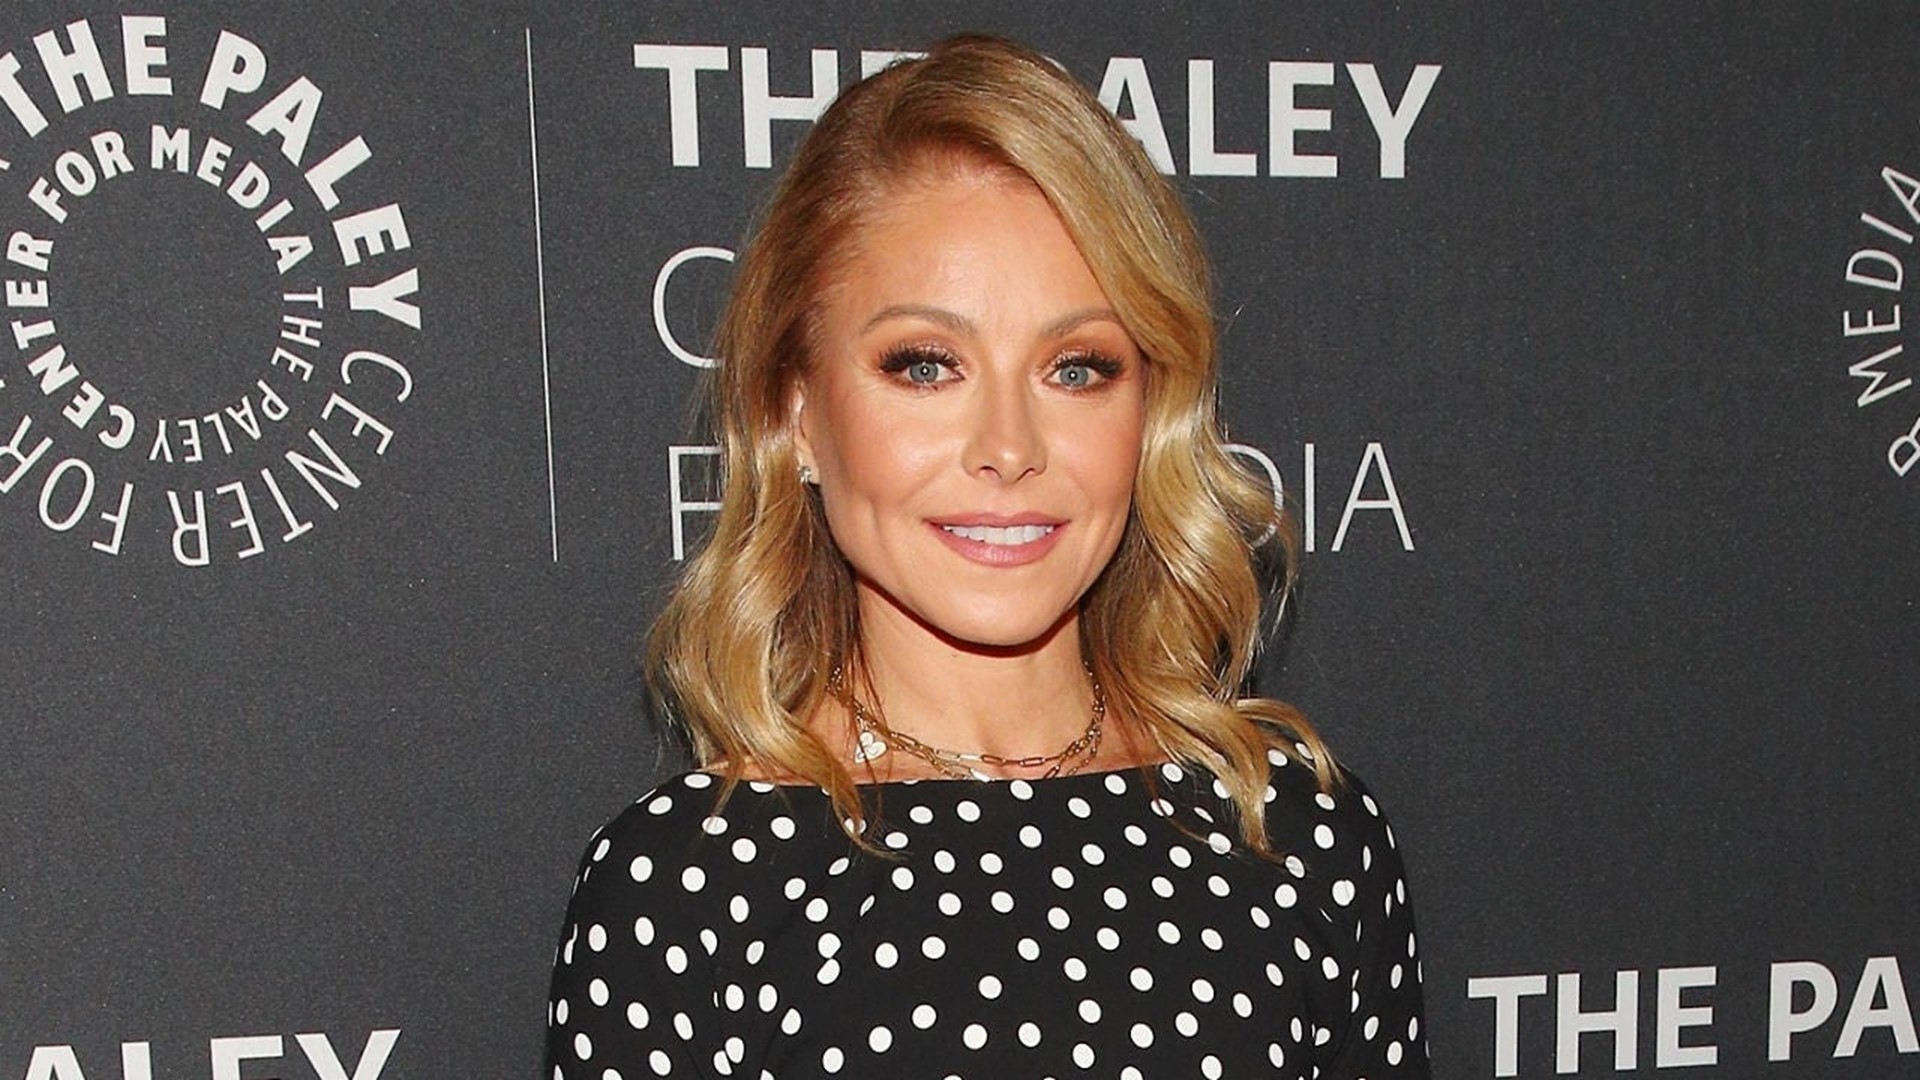 Kelly Ripa Reveals She Cut Her Own Hair With Kitchen Scissors While In Quarantine 